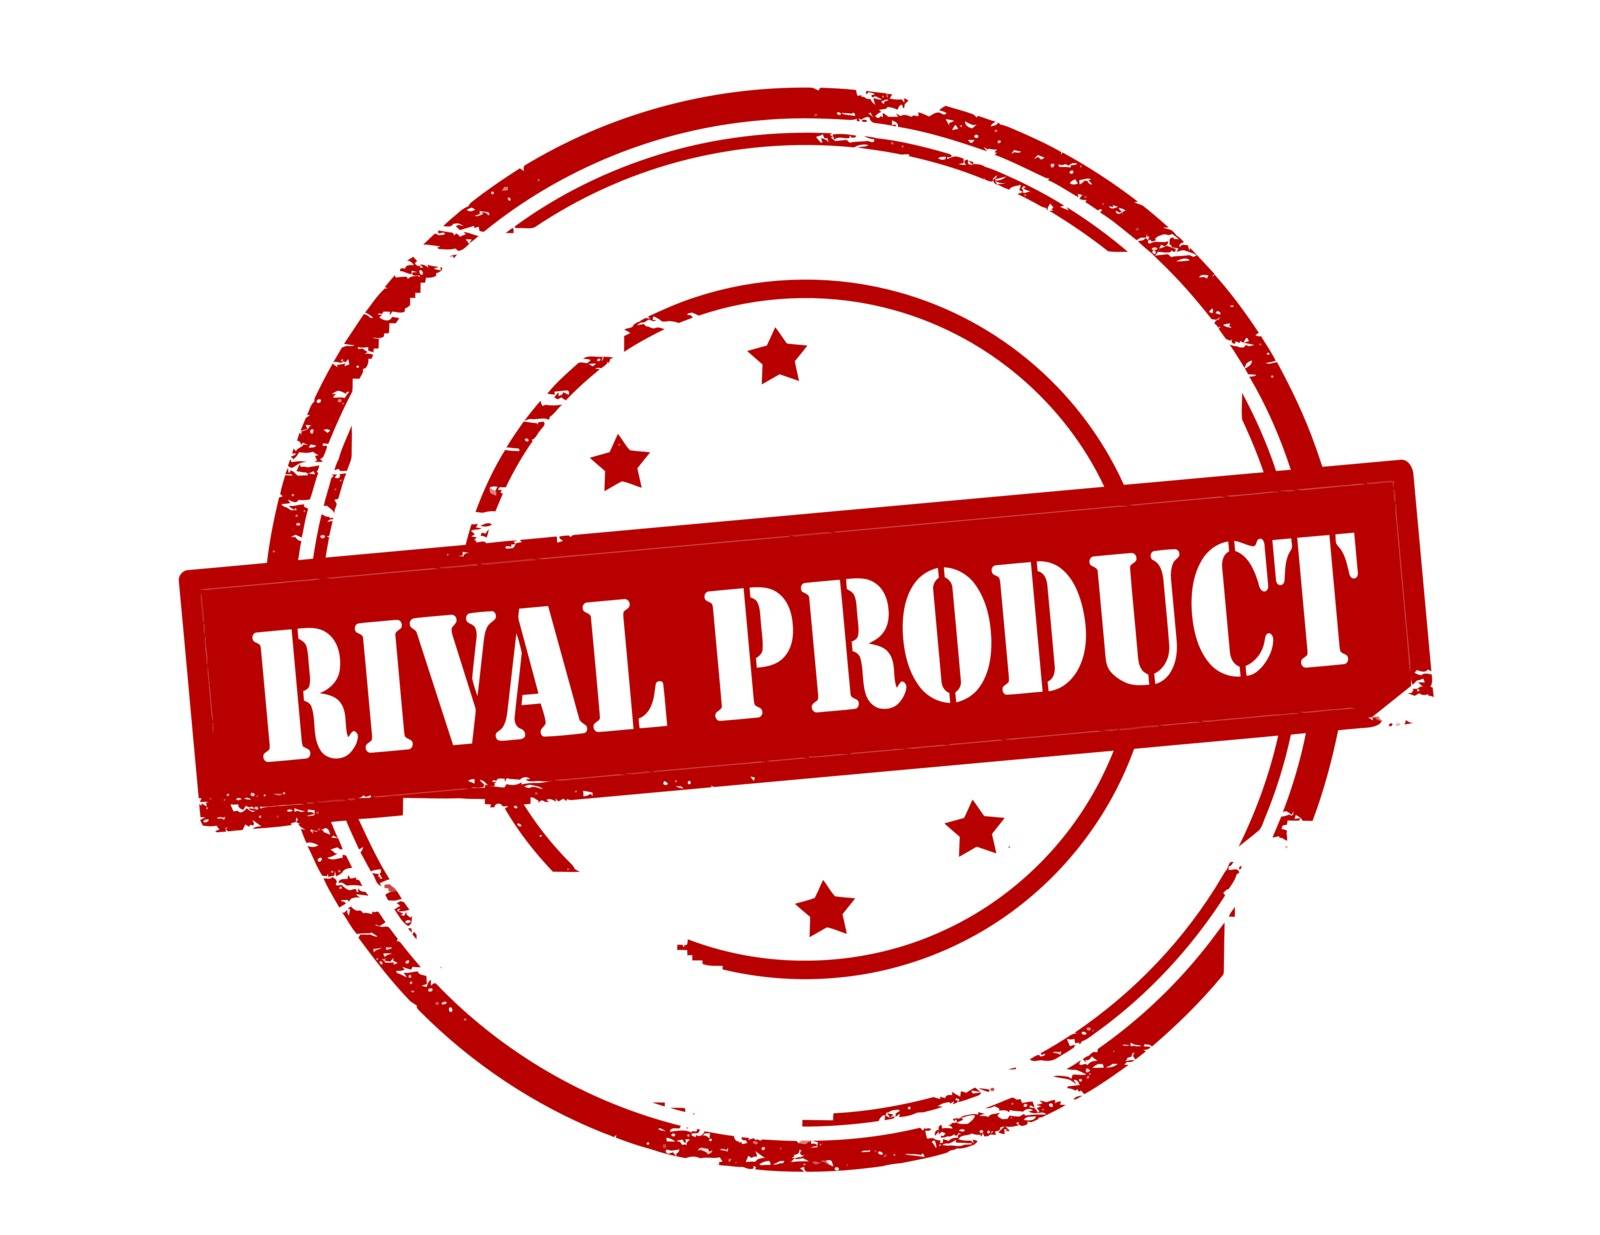 Rival product by carmenbobo